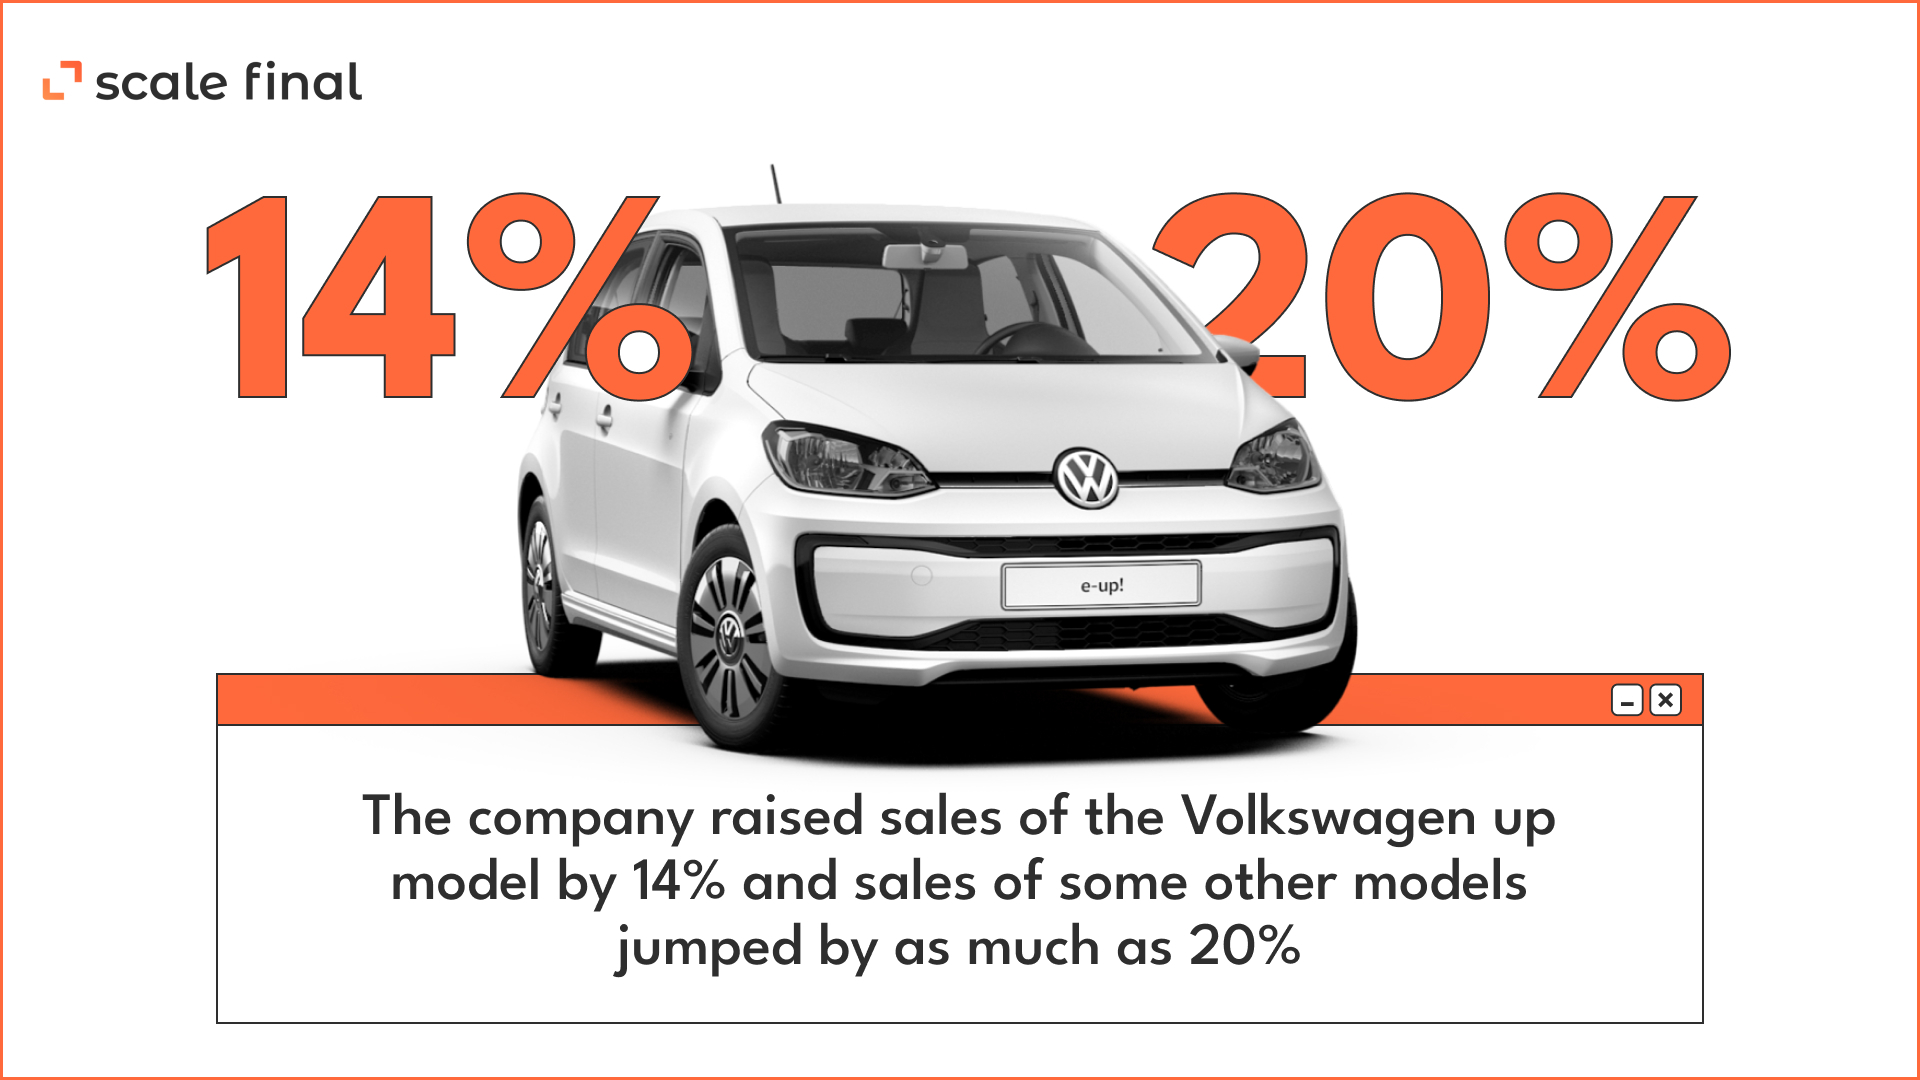 Volkswagen AI outperforms an entire marketing agency